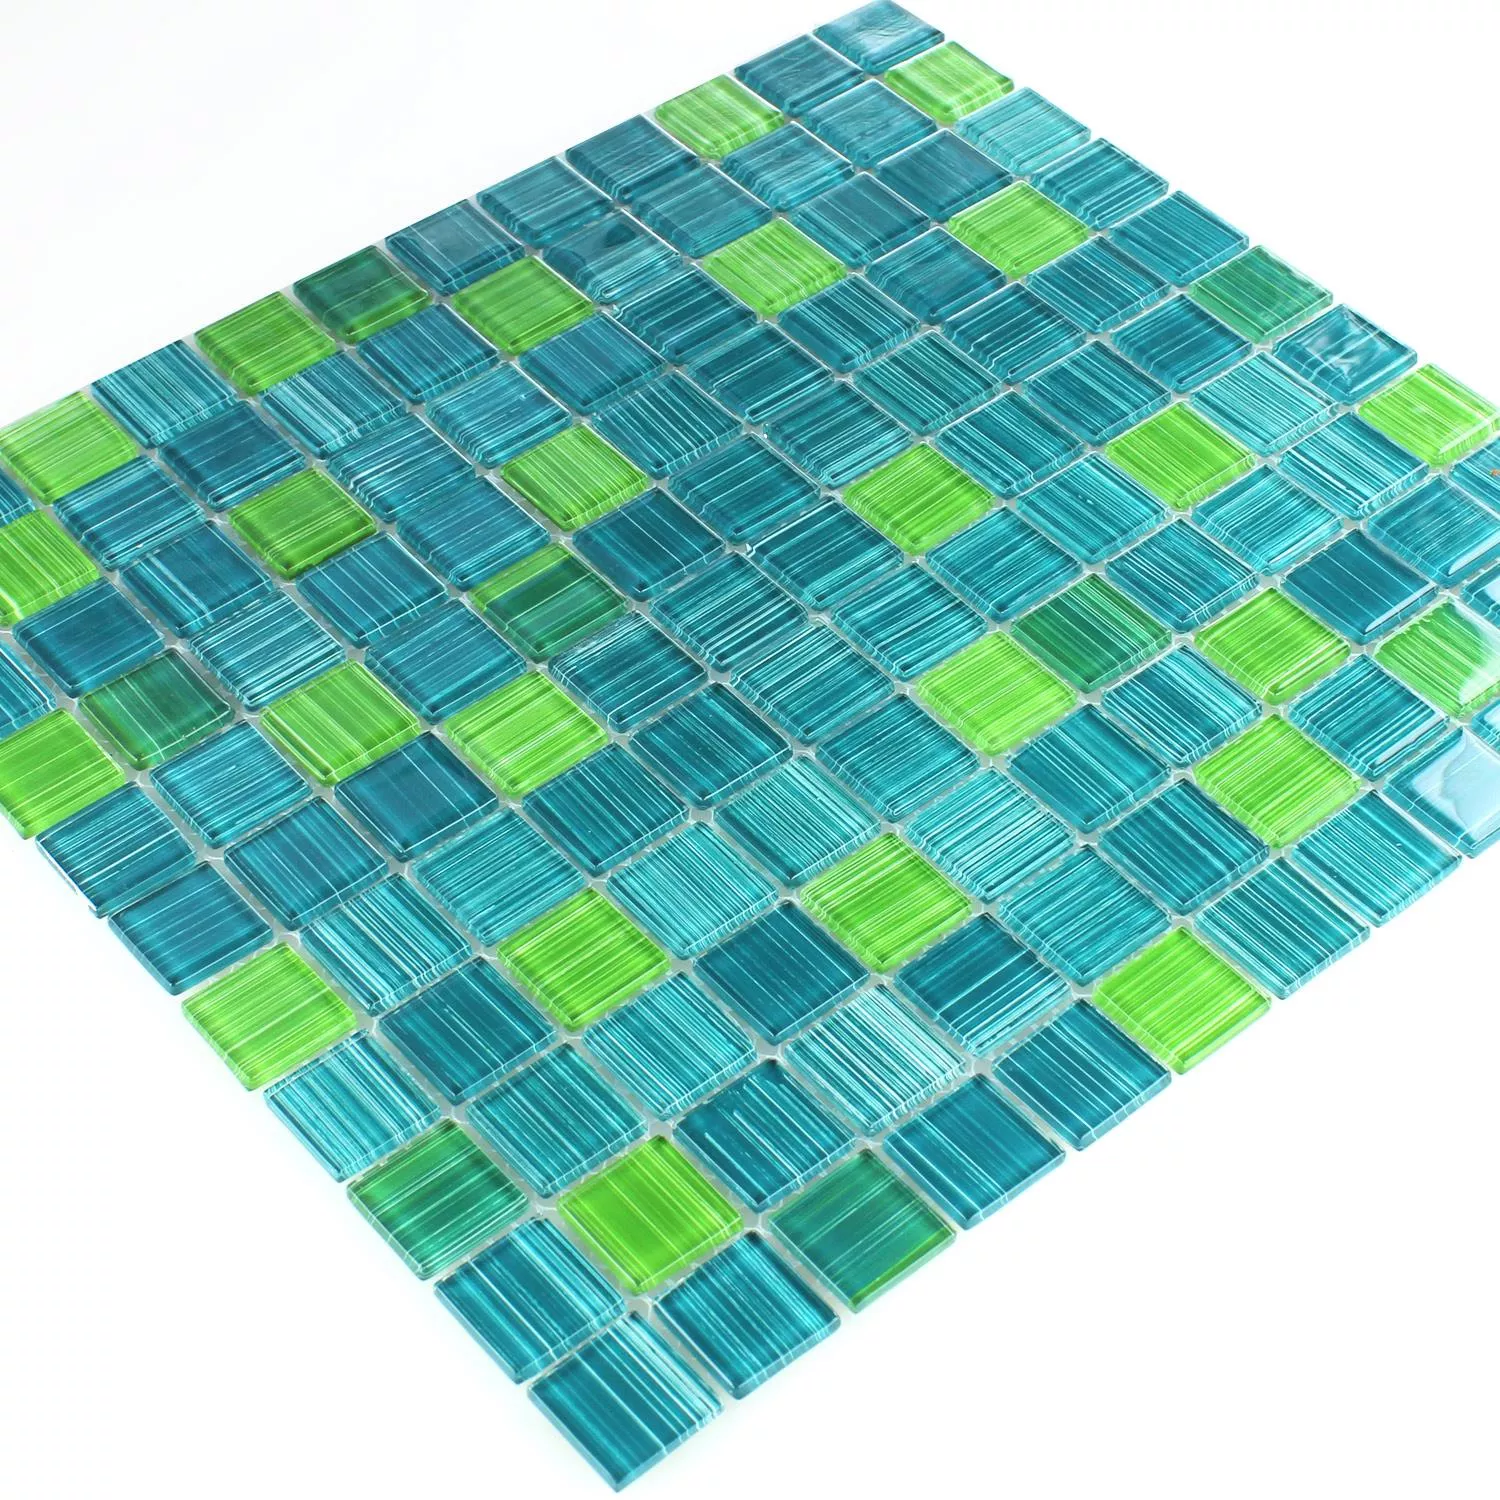 Striped Crystal Mosaic Tiles Glass Green Mix